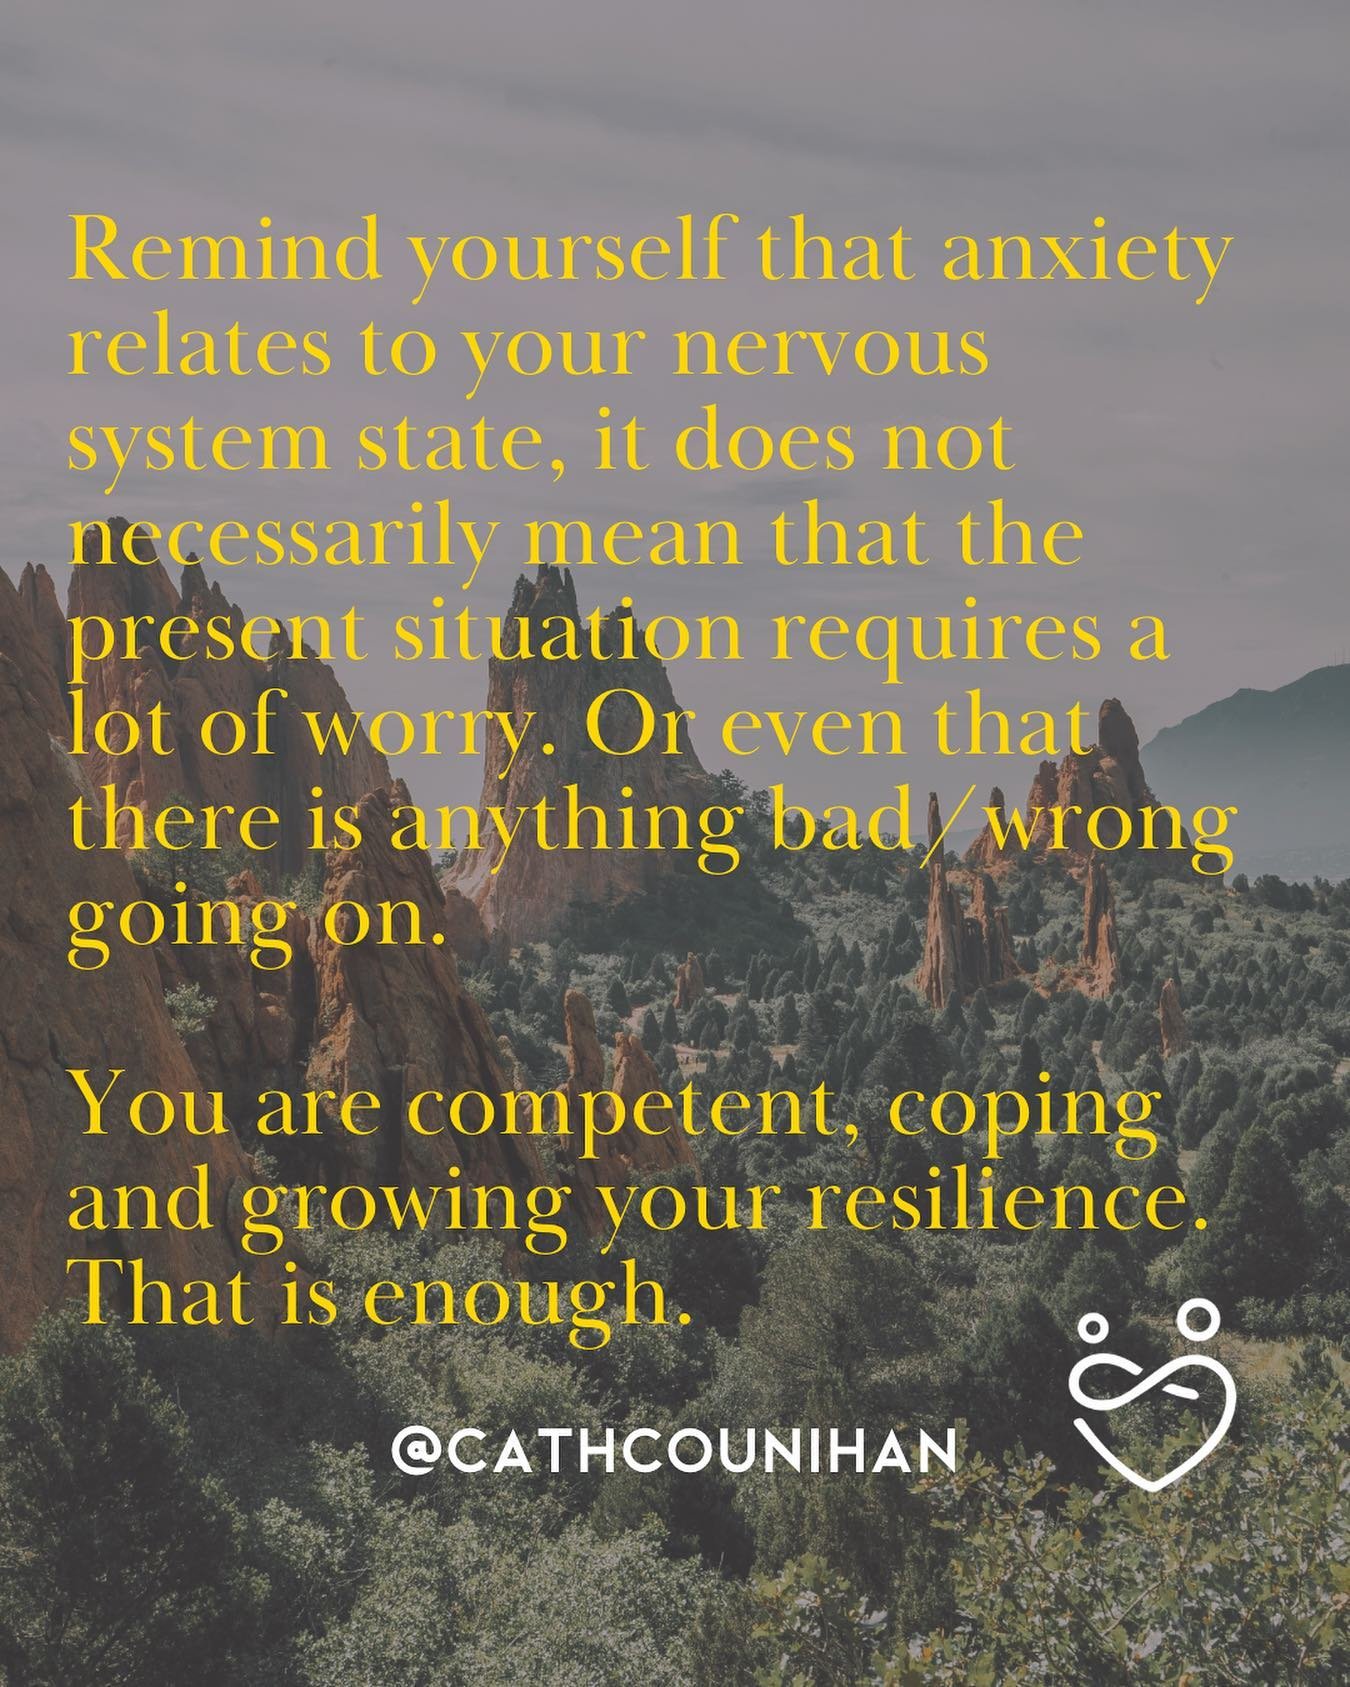 Experiencing anxiety relates to how our nervous system was patterned in our early lives. 

When we did not get our emotional needs adequately tended to in childhood anxiety is an almost inevitable consequence.

It is NOT a deficit or something to be 